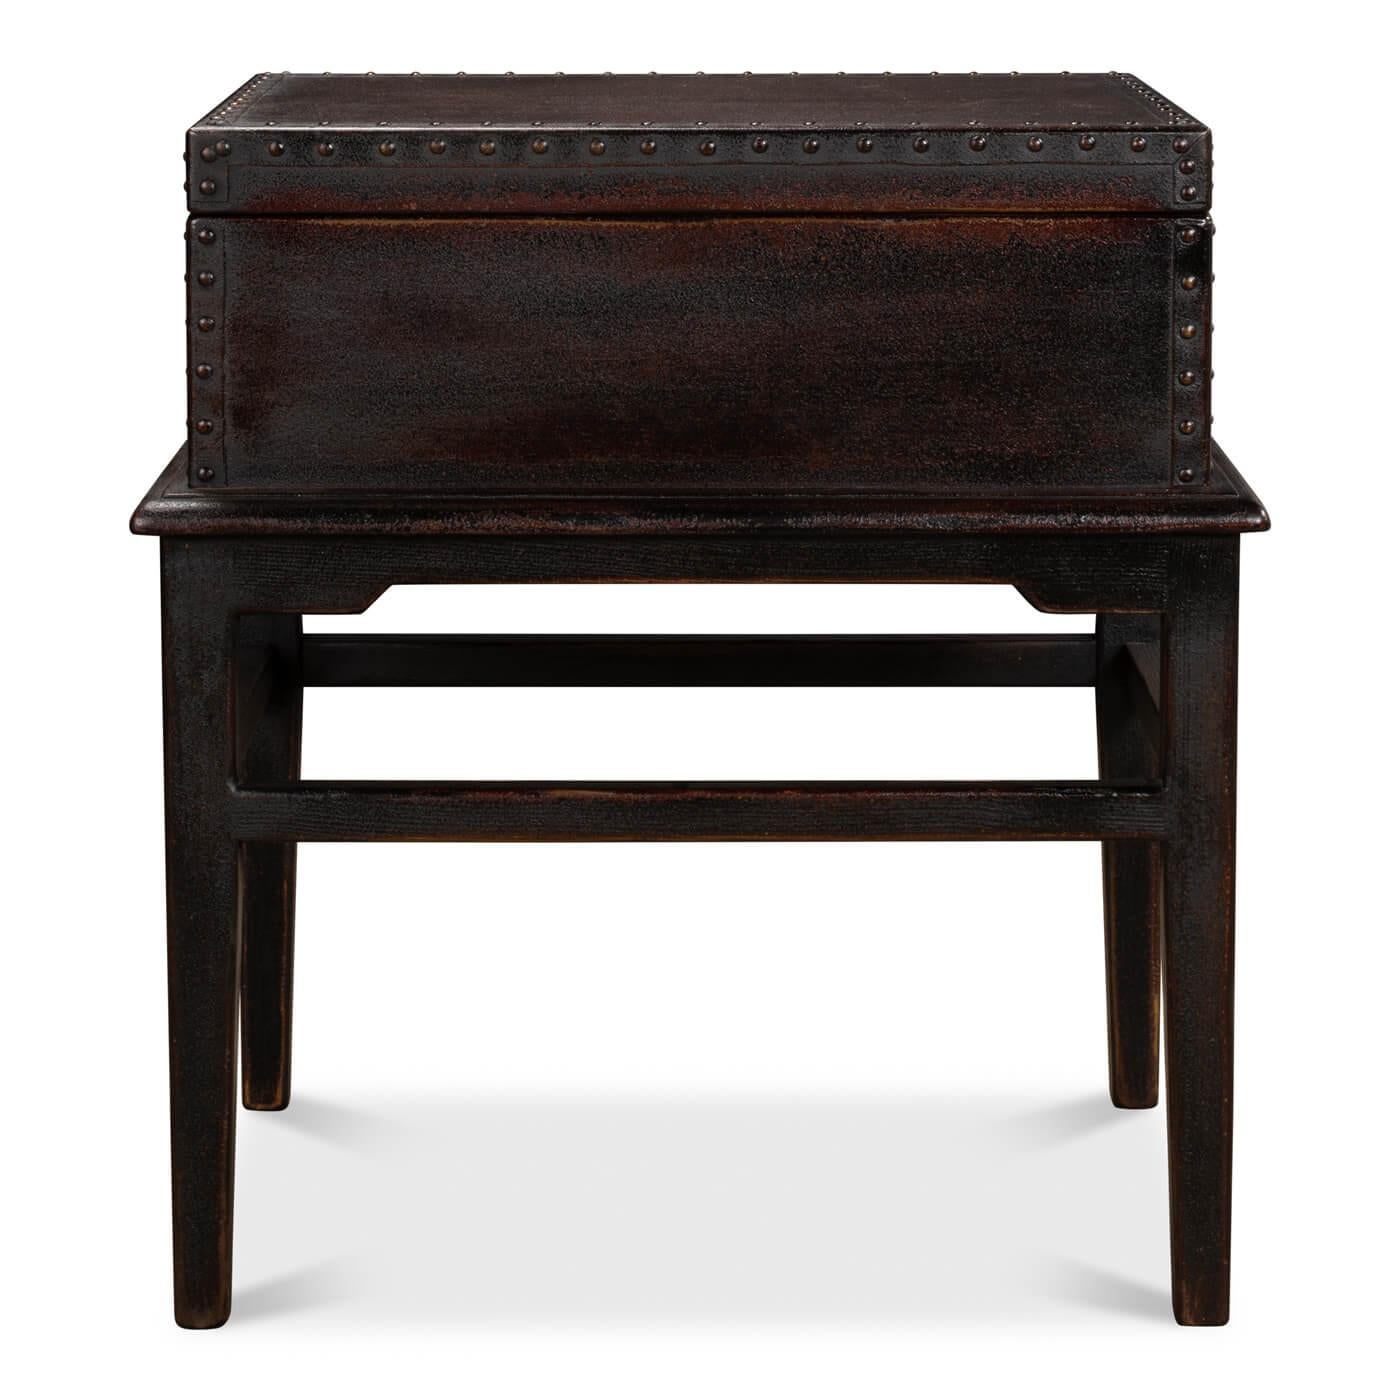 An Asian style leather box on stand table. The rectangular box with a removable lid is covered in leather with nailhead trim. It sits on a reclaimed pine base in a 